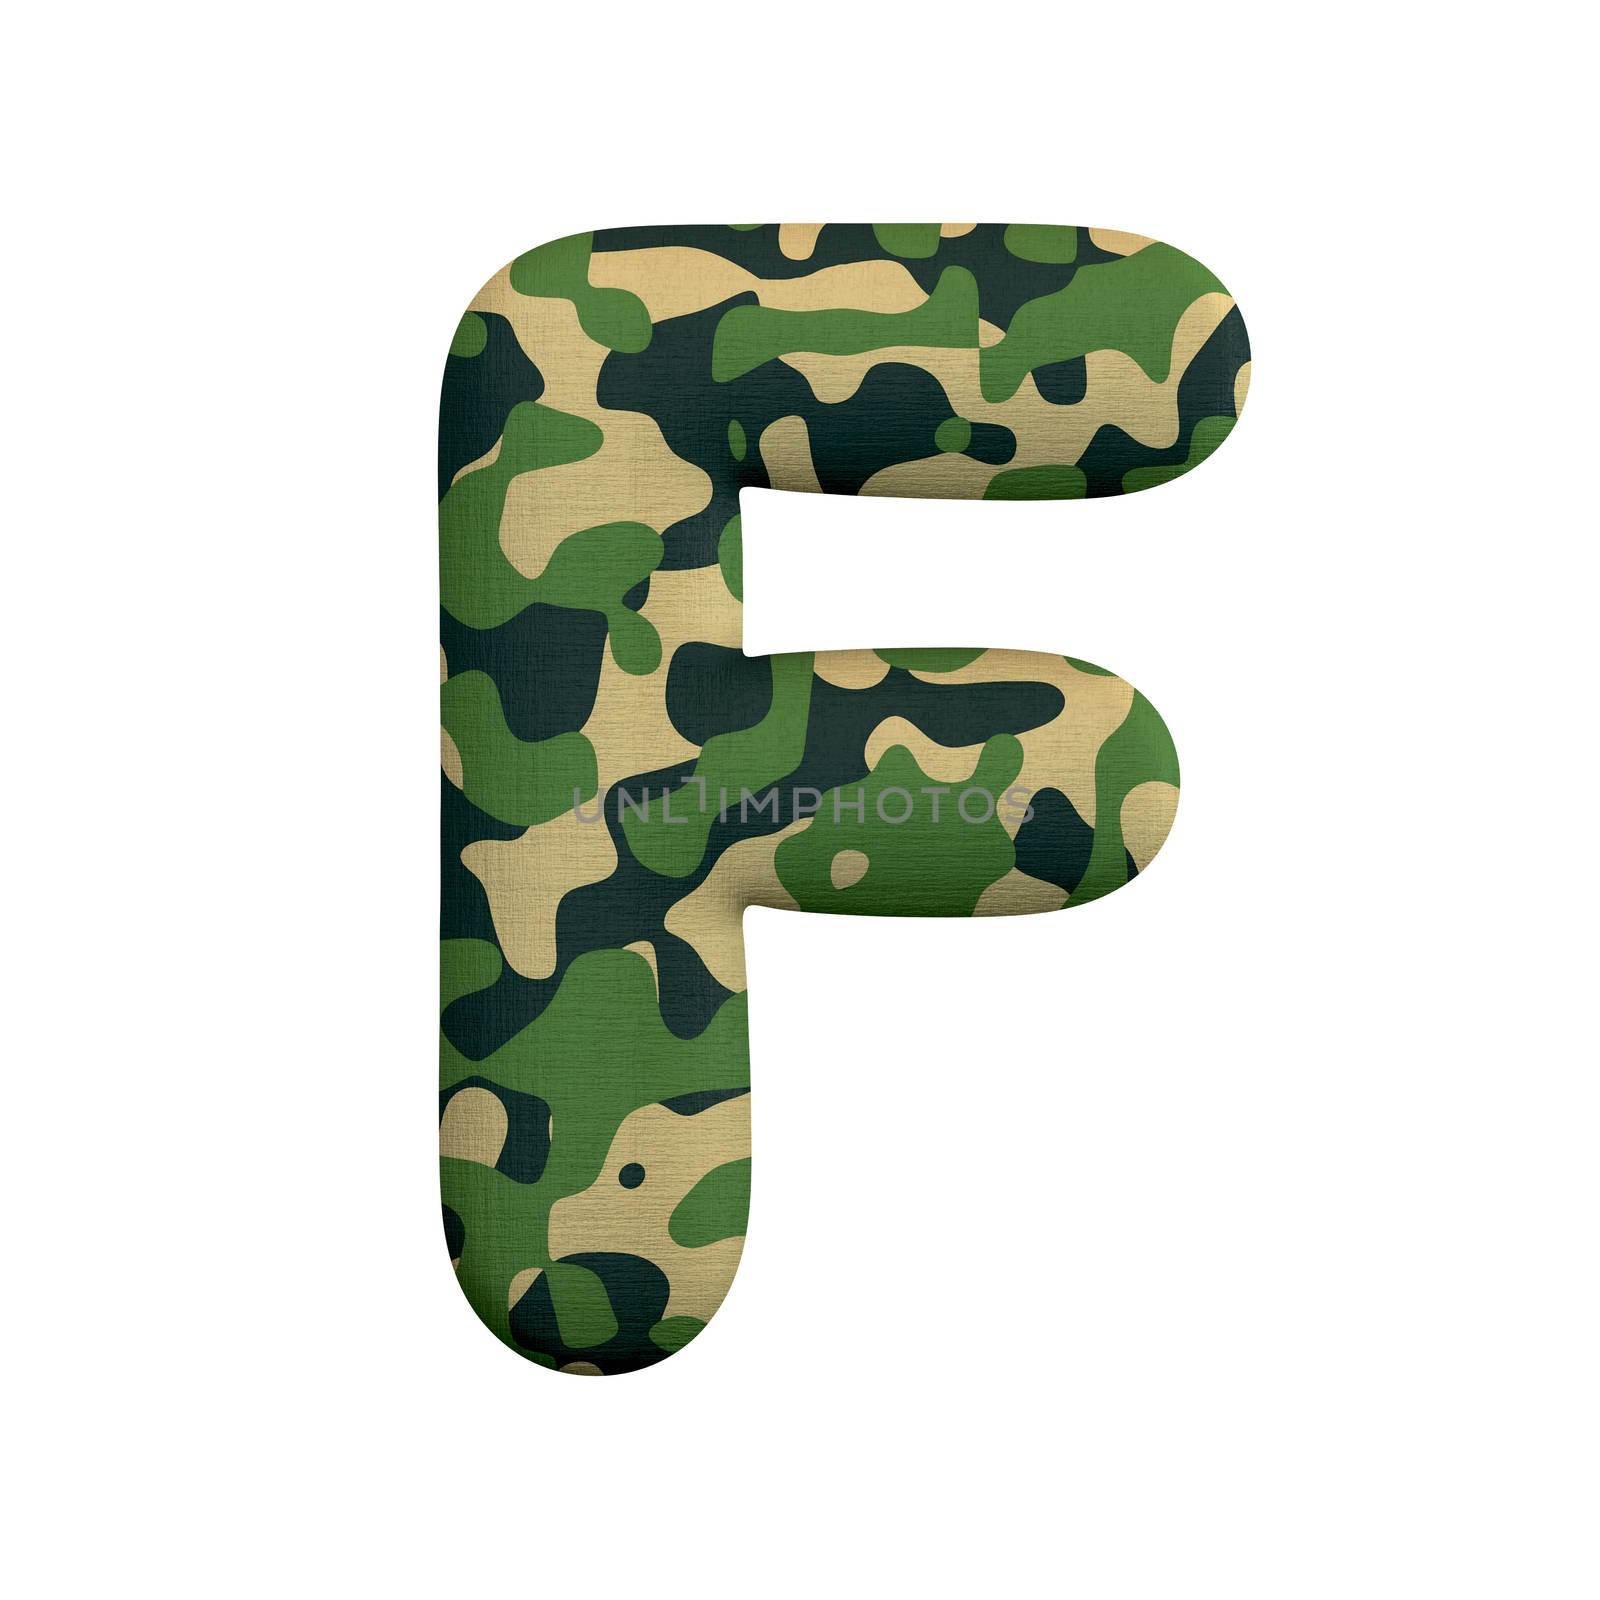 Army letter F - Upper-case 3d Camo font - Army, war or survivalism concept by chrisroll